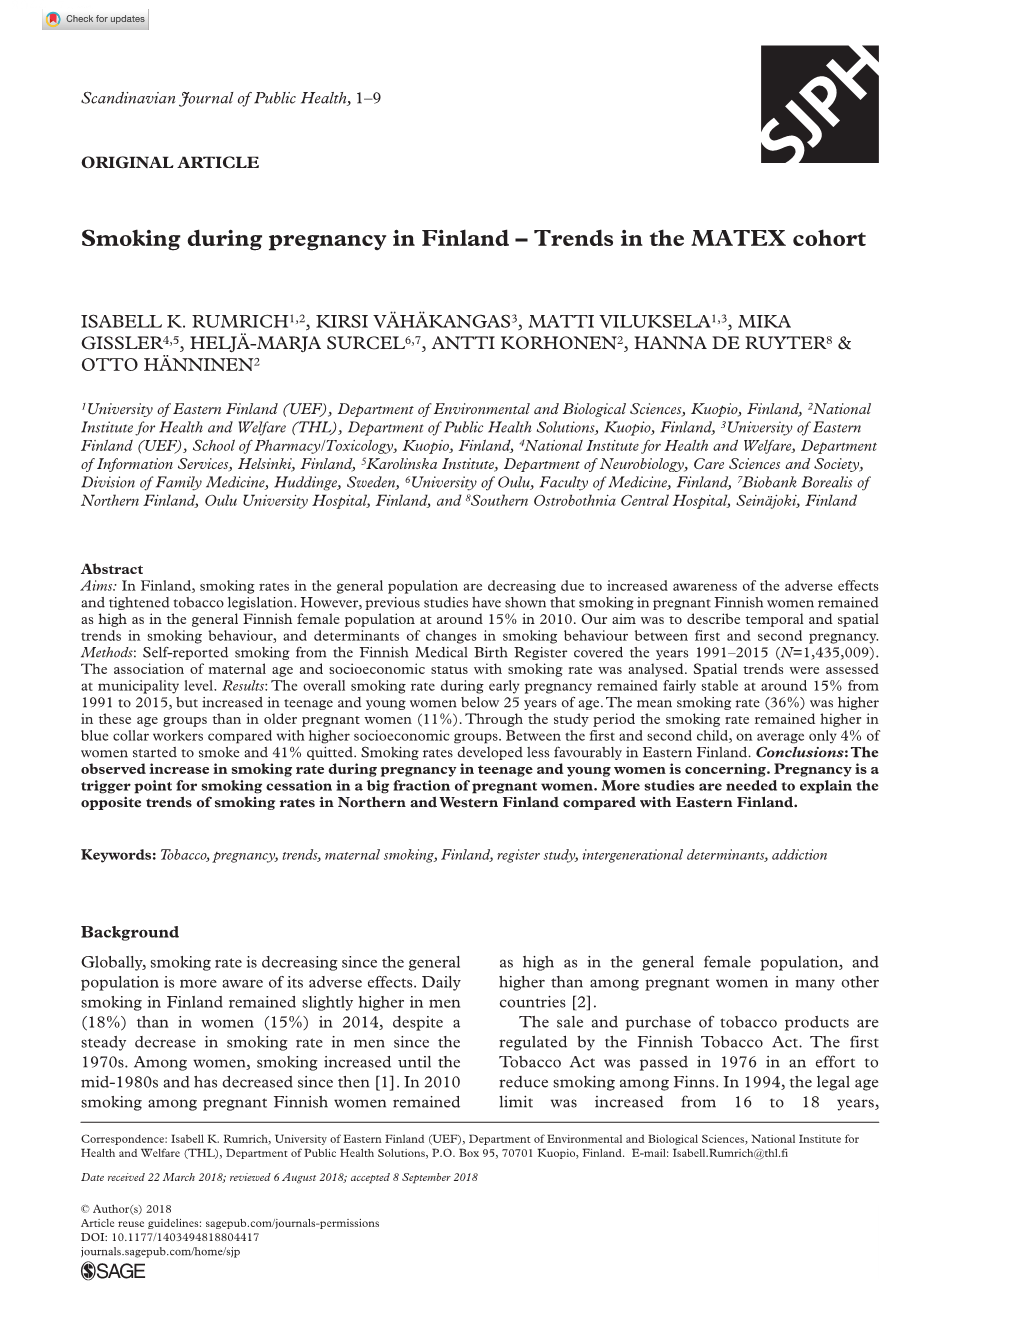 Smoking During Pregnancy in Finland – Trends in the MATEX Cohort